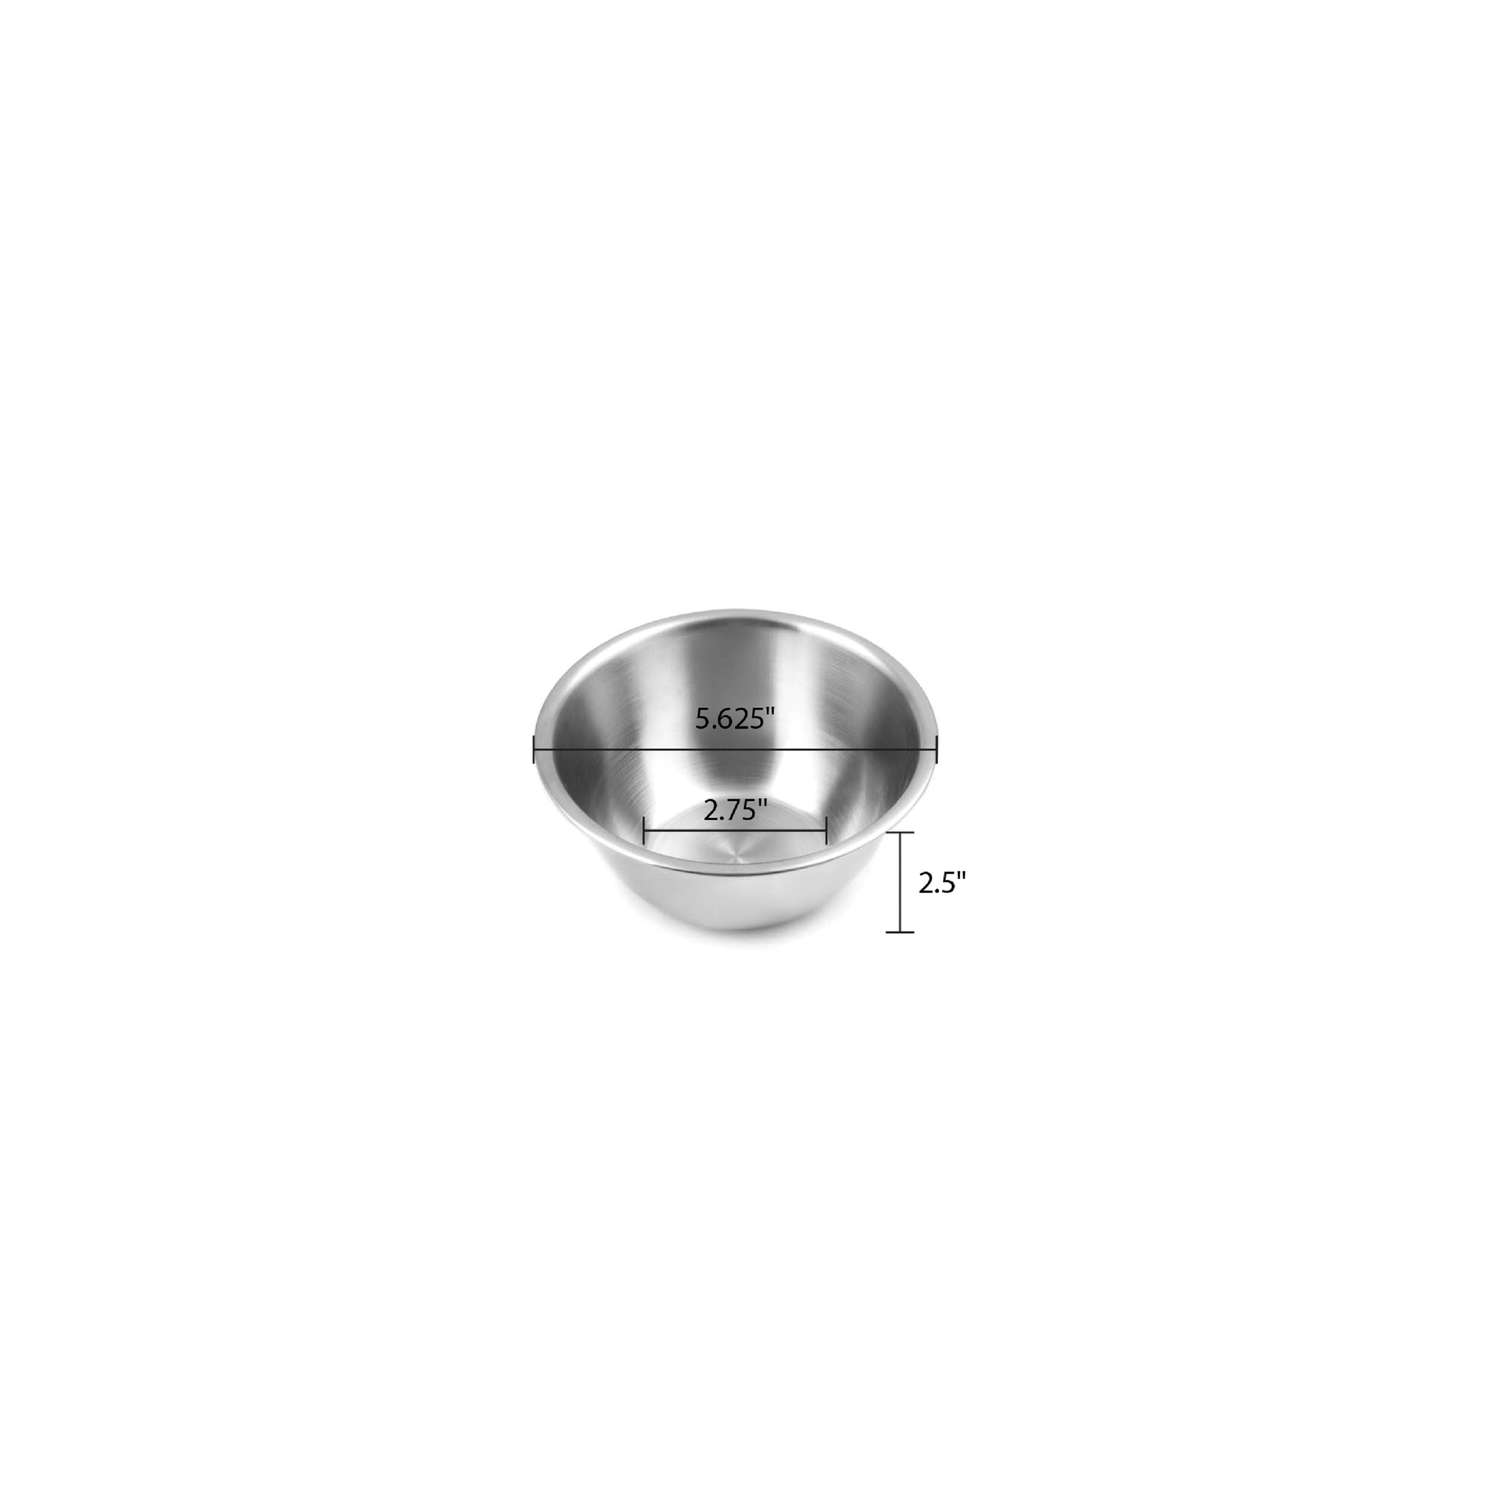 1pc Stainless Steel Bowl, Silver Mini Portable Salad Bowl For